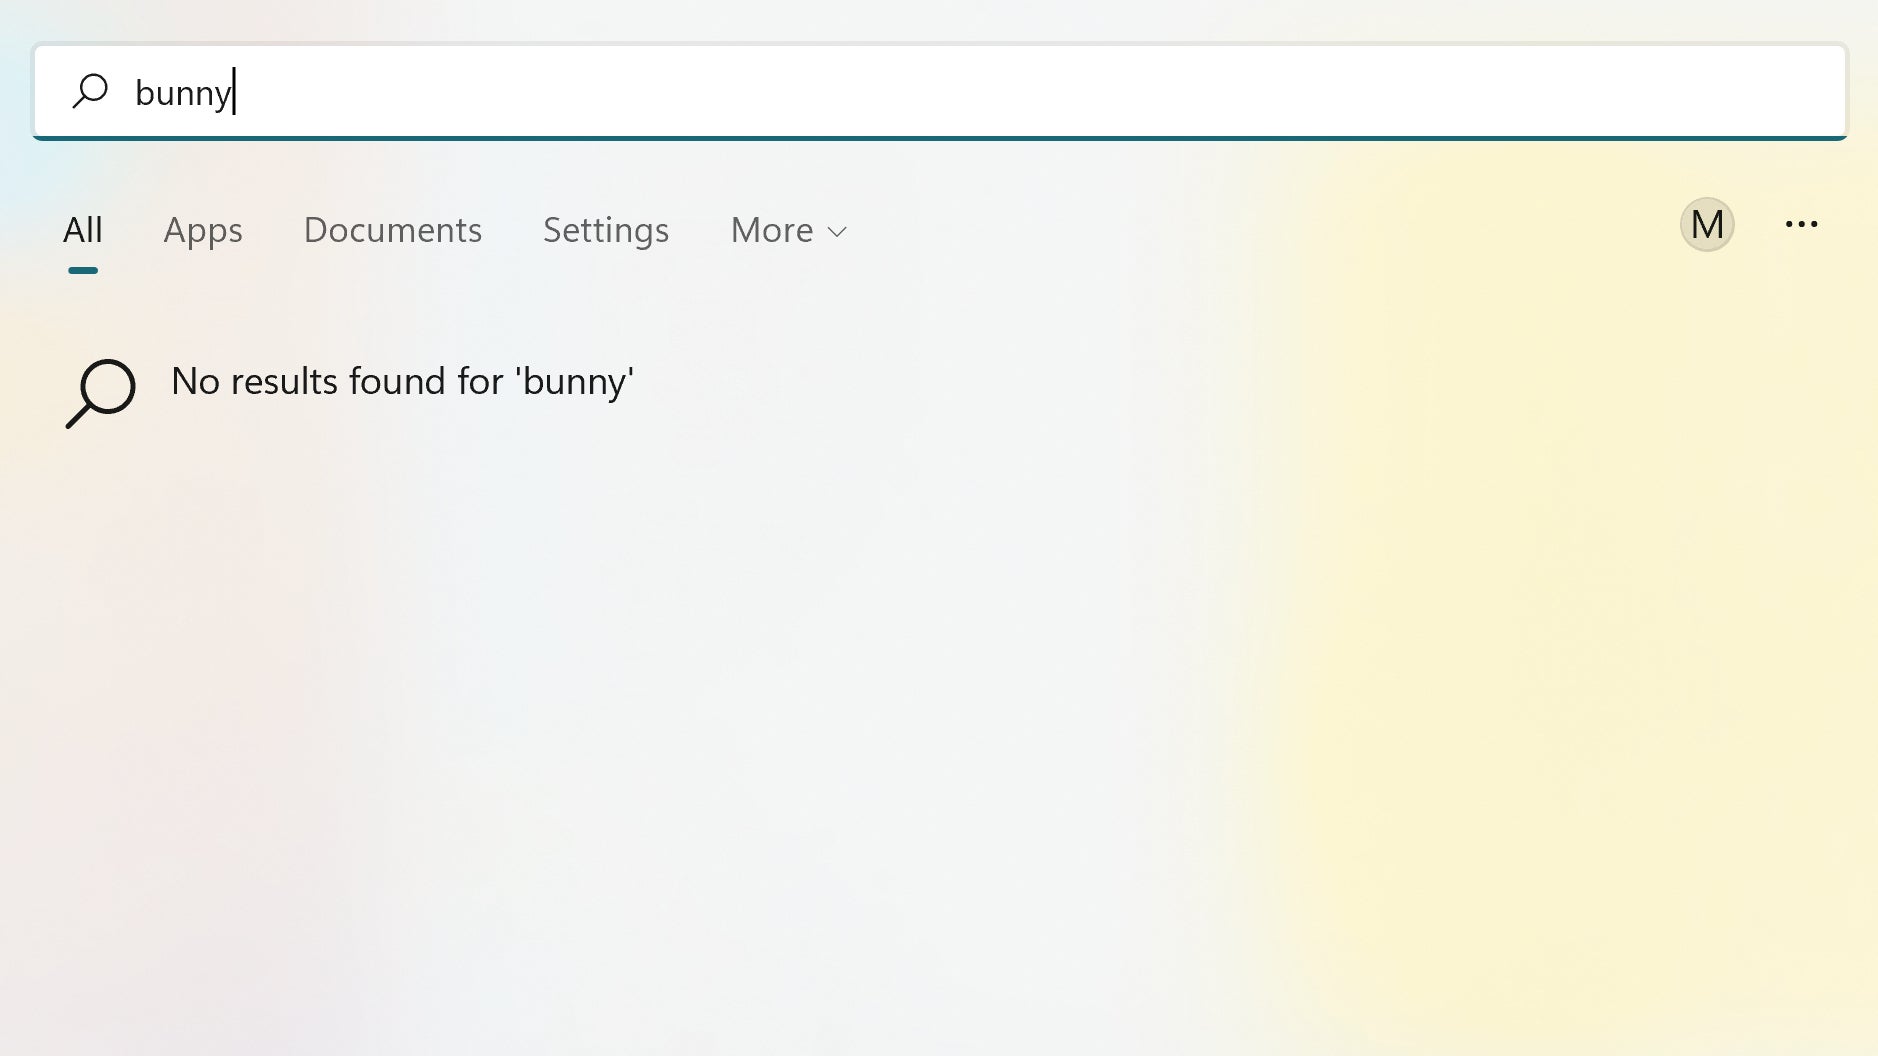 The Windows 11 Start menu search with Bing removed, showing no results for "bunny."